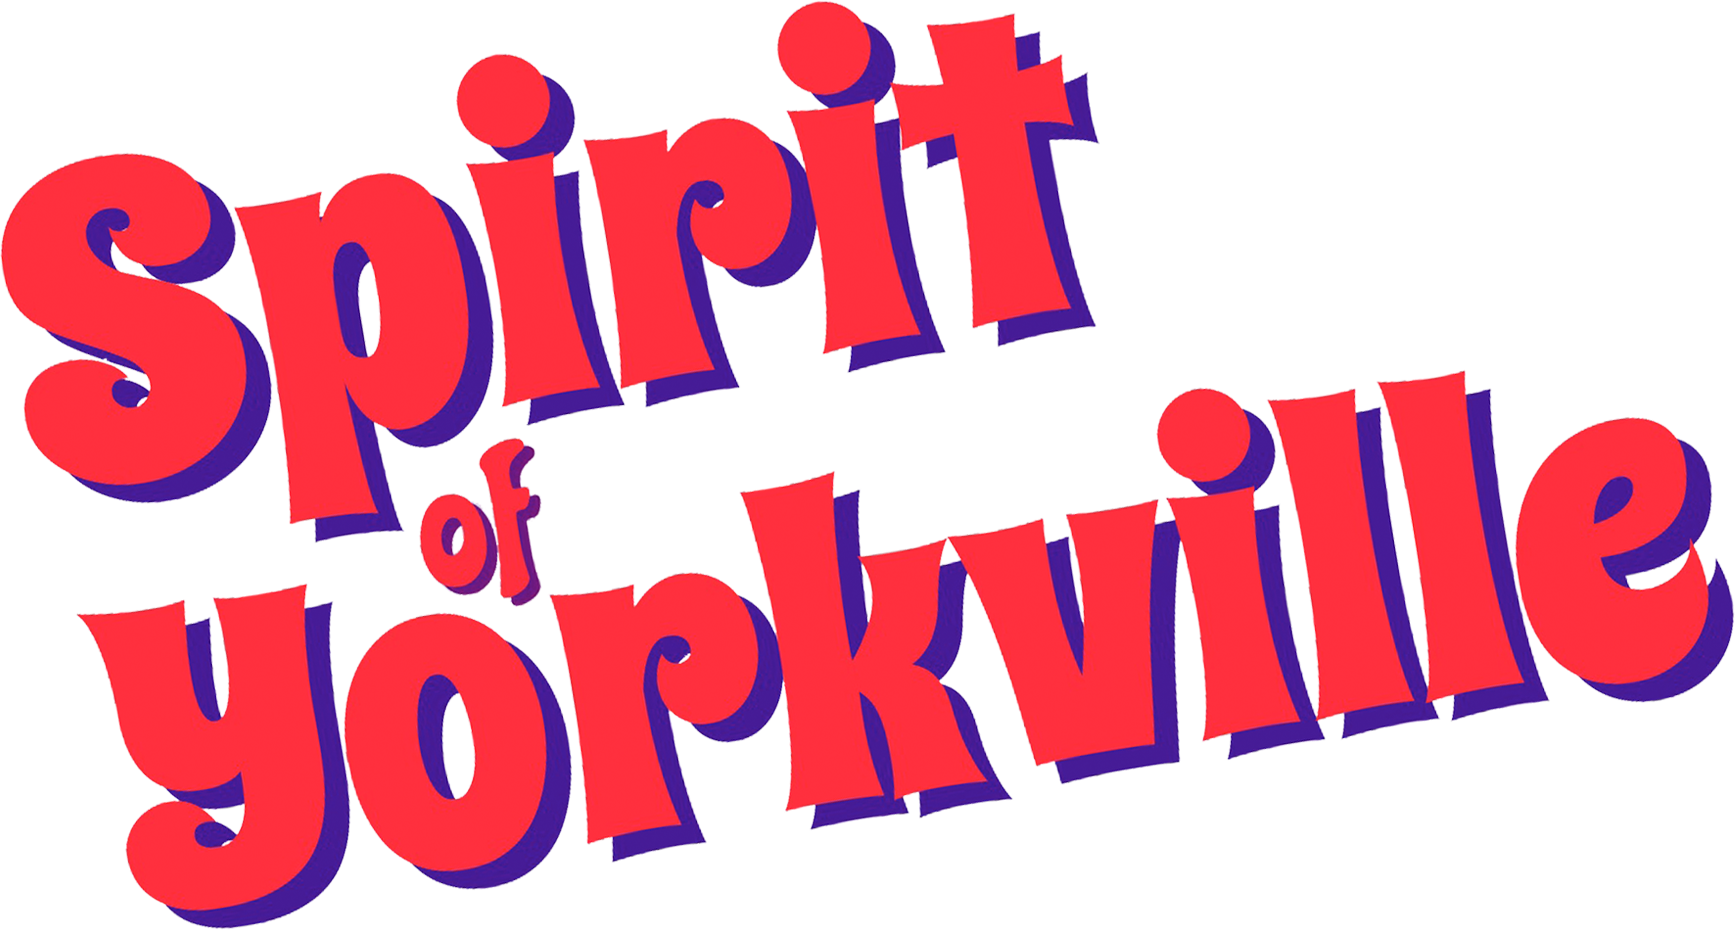 Get Your Groove On @ This Weekend's Spirit Of Yorkville - Get Your Groove On @ This Weekend's Spirit Of Yorkville (1735x930)